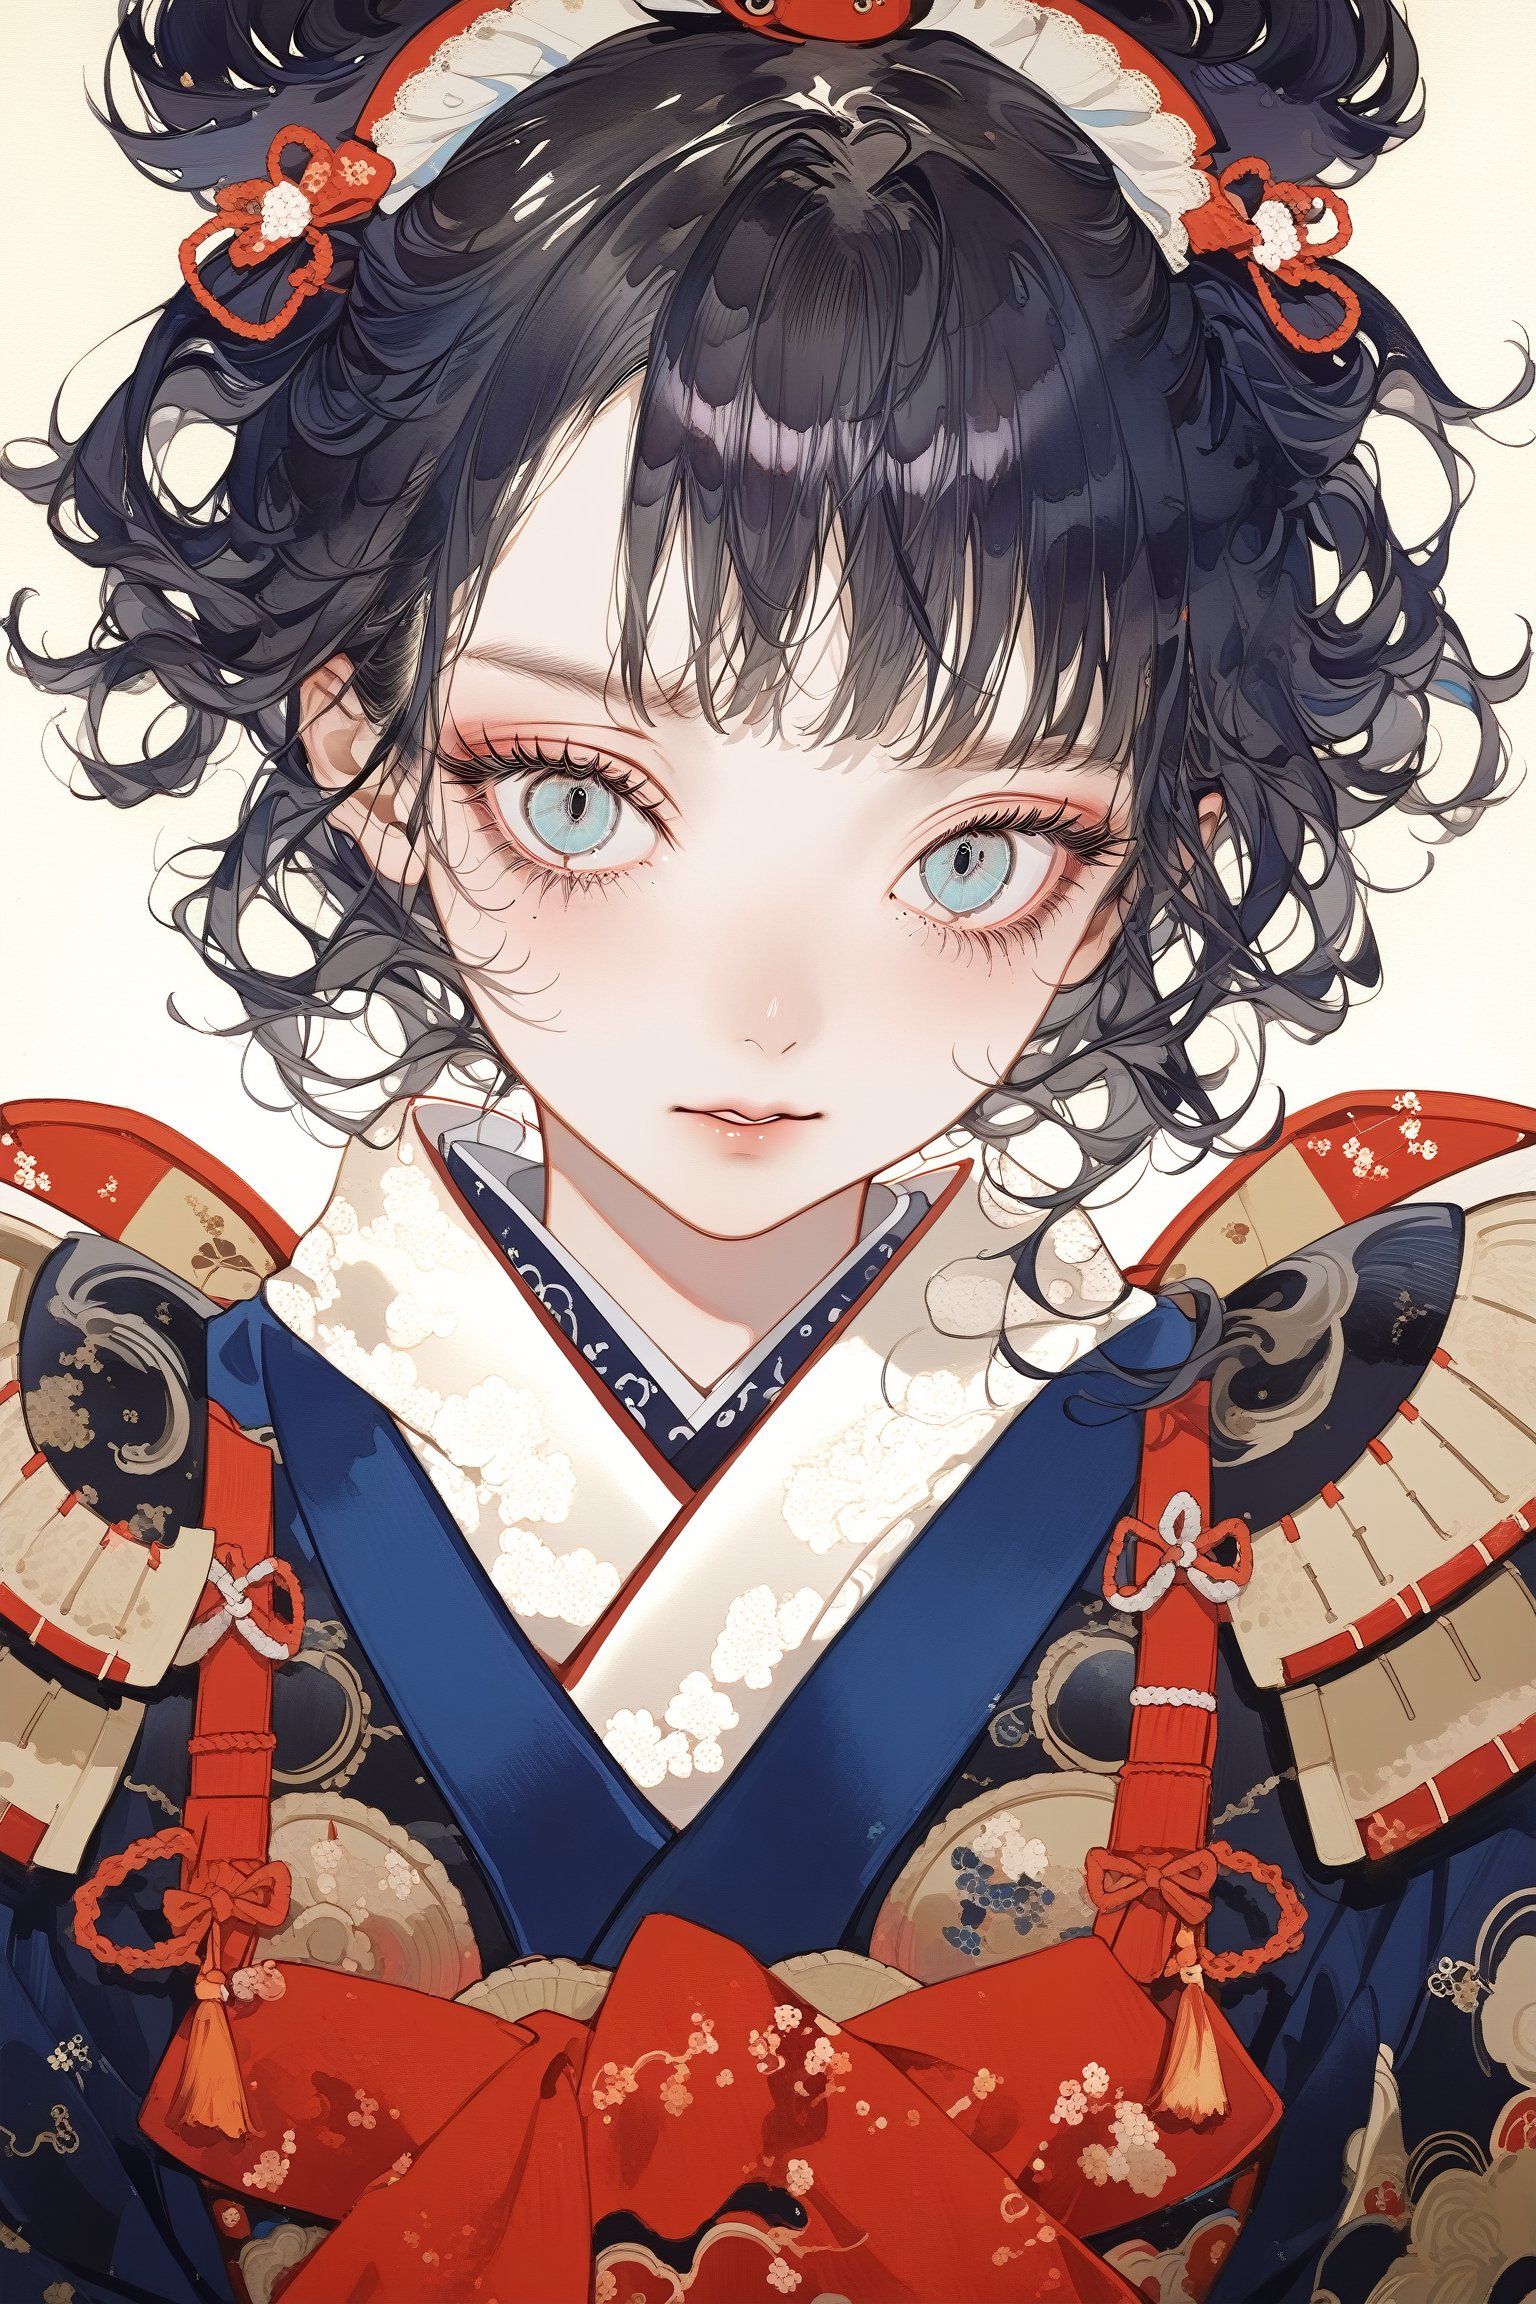 1girl,cute Face,dressed in samurai-style armor,slit pupils,mysterious, narrow, alluring eyes, She wears traditional Japanese armor reminiscent of a samurai, dark blue hakama
,The design blends elegance with strength, portraying her as a warrior princess,warrior,samurai,emo,Realistic Blue Eyes,Inutade